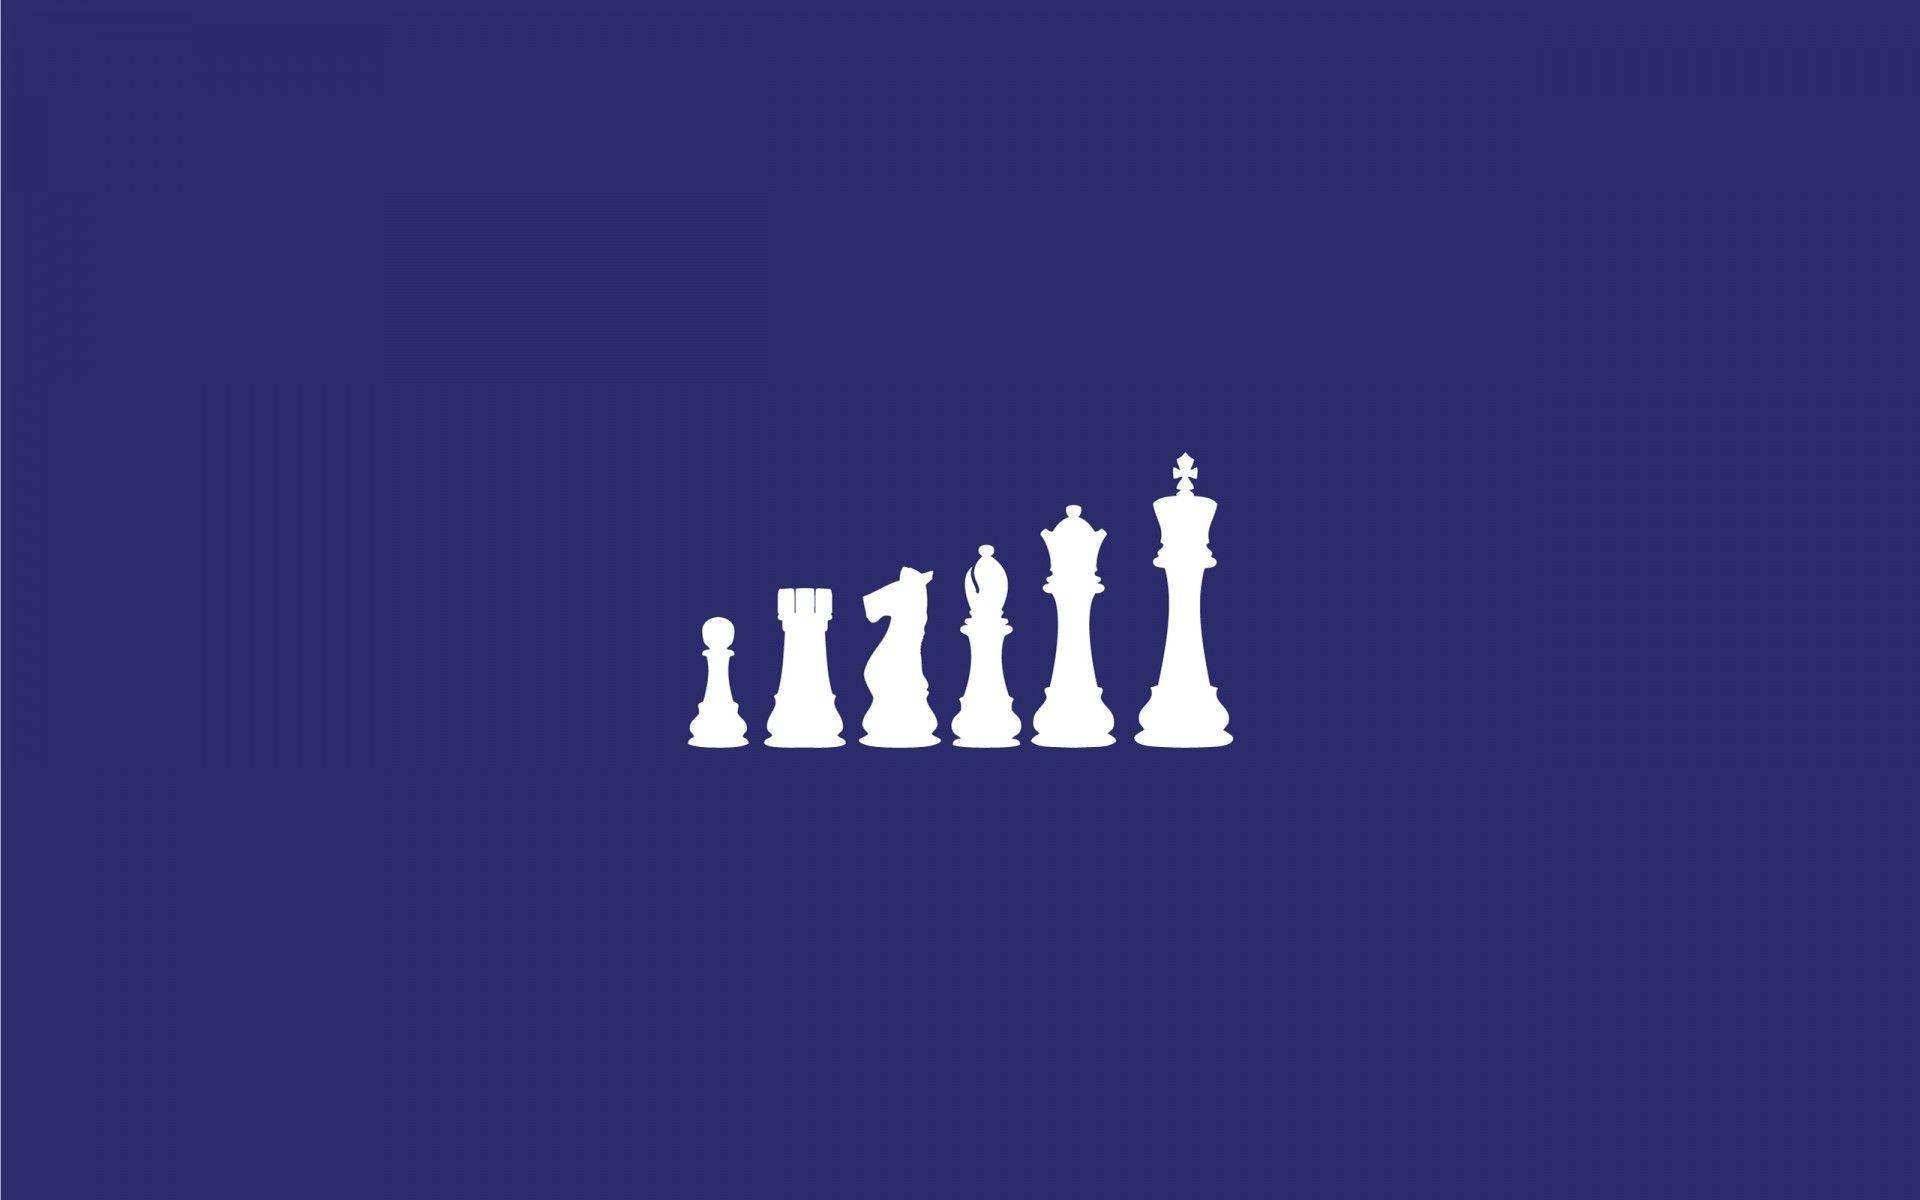 Chess Figures. Android wallpaper for free